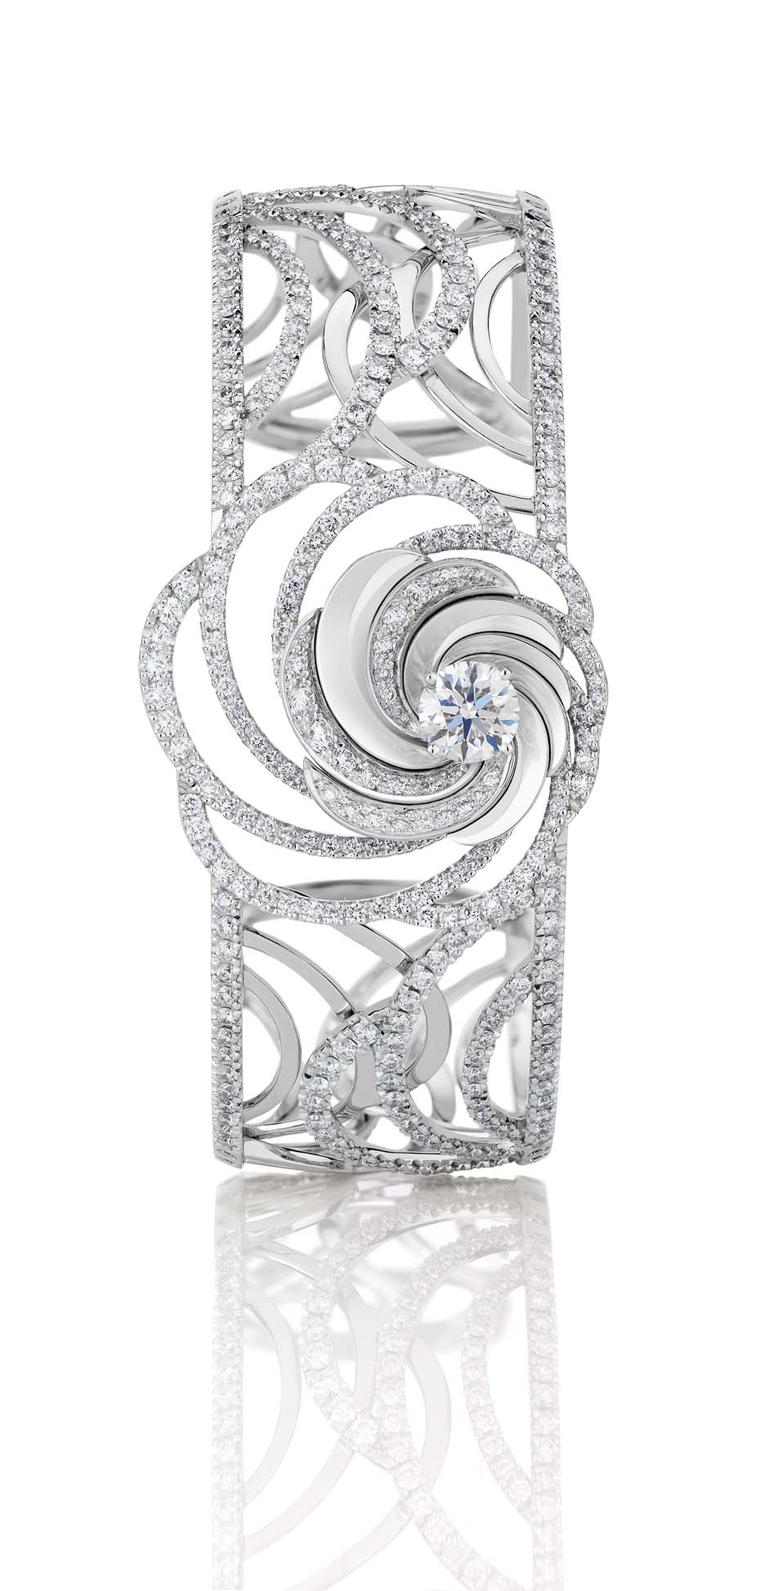 De Beers Aria diamond bracelet, with a series of swirling white gold ribbons set with pavé diamonds surrounding a central brilliant-cut diamond.